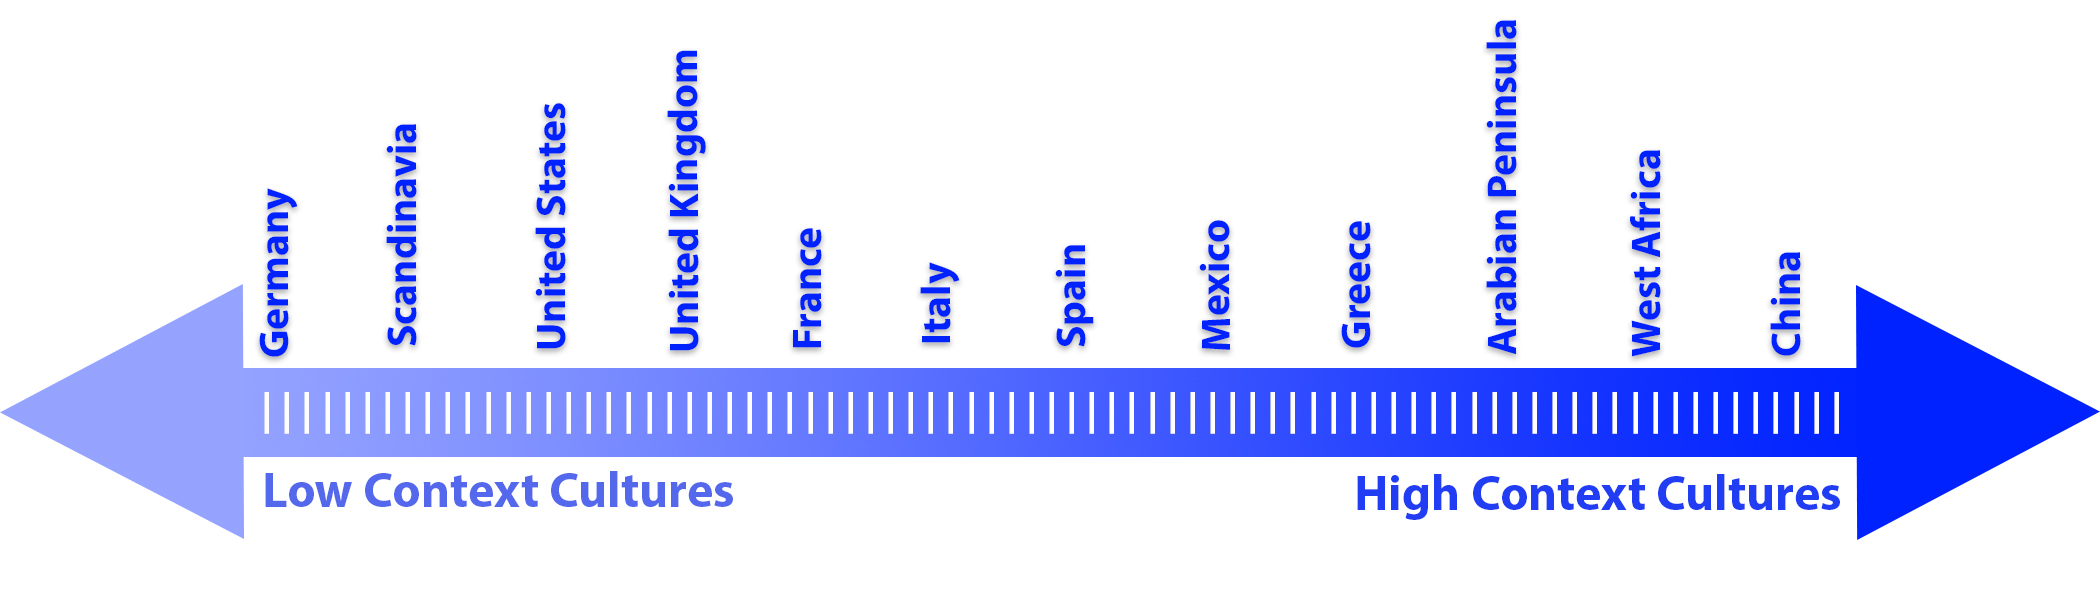 A continuum of countires listed according to high context and low comtext communication styles.